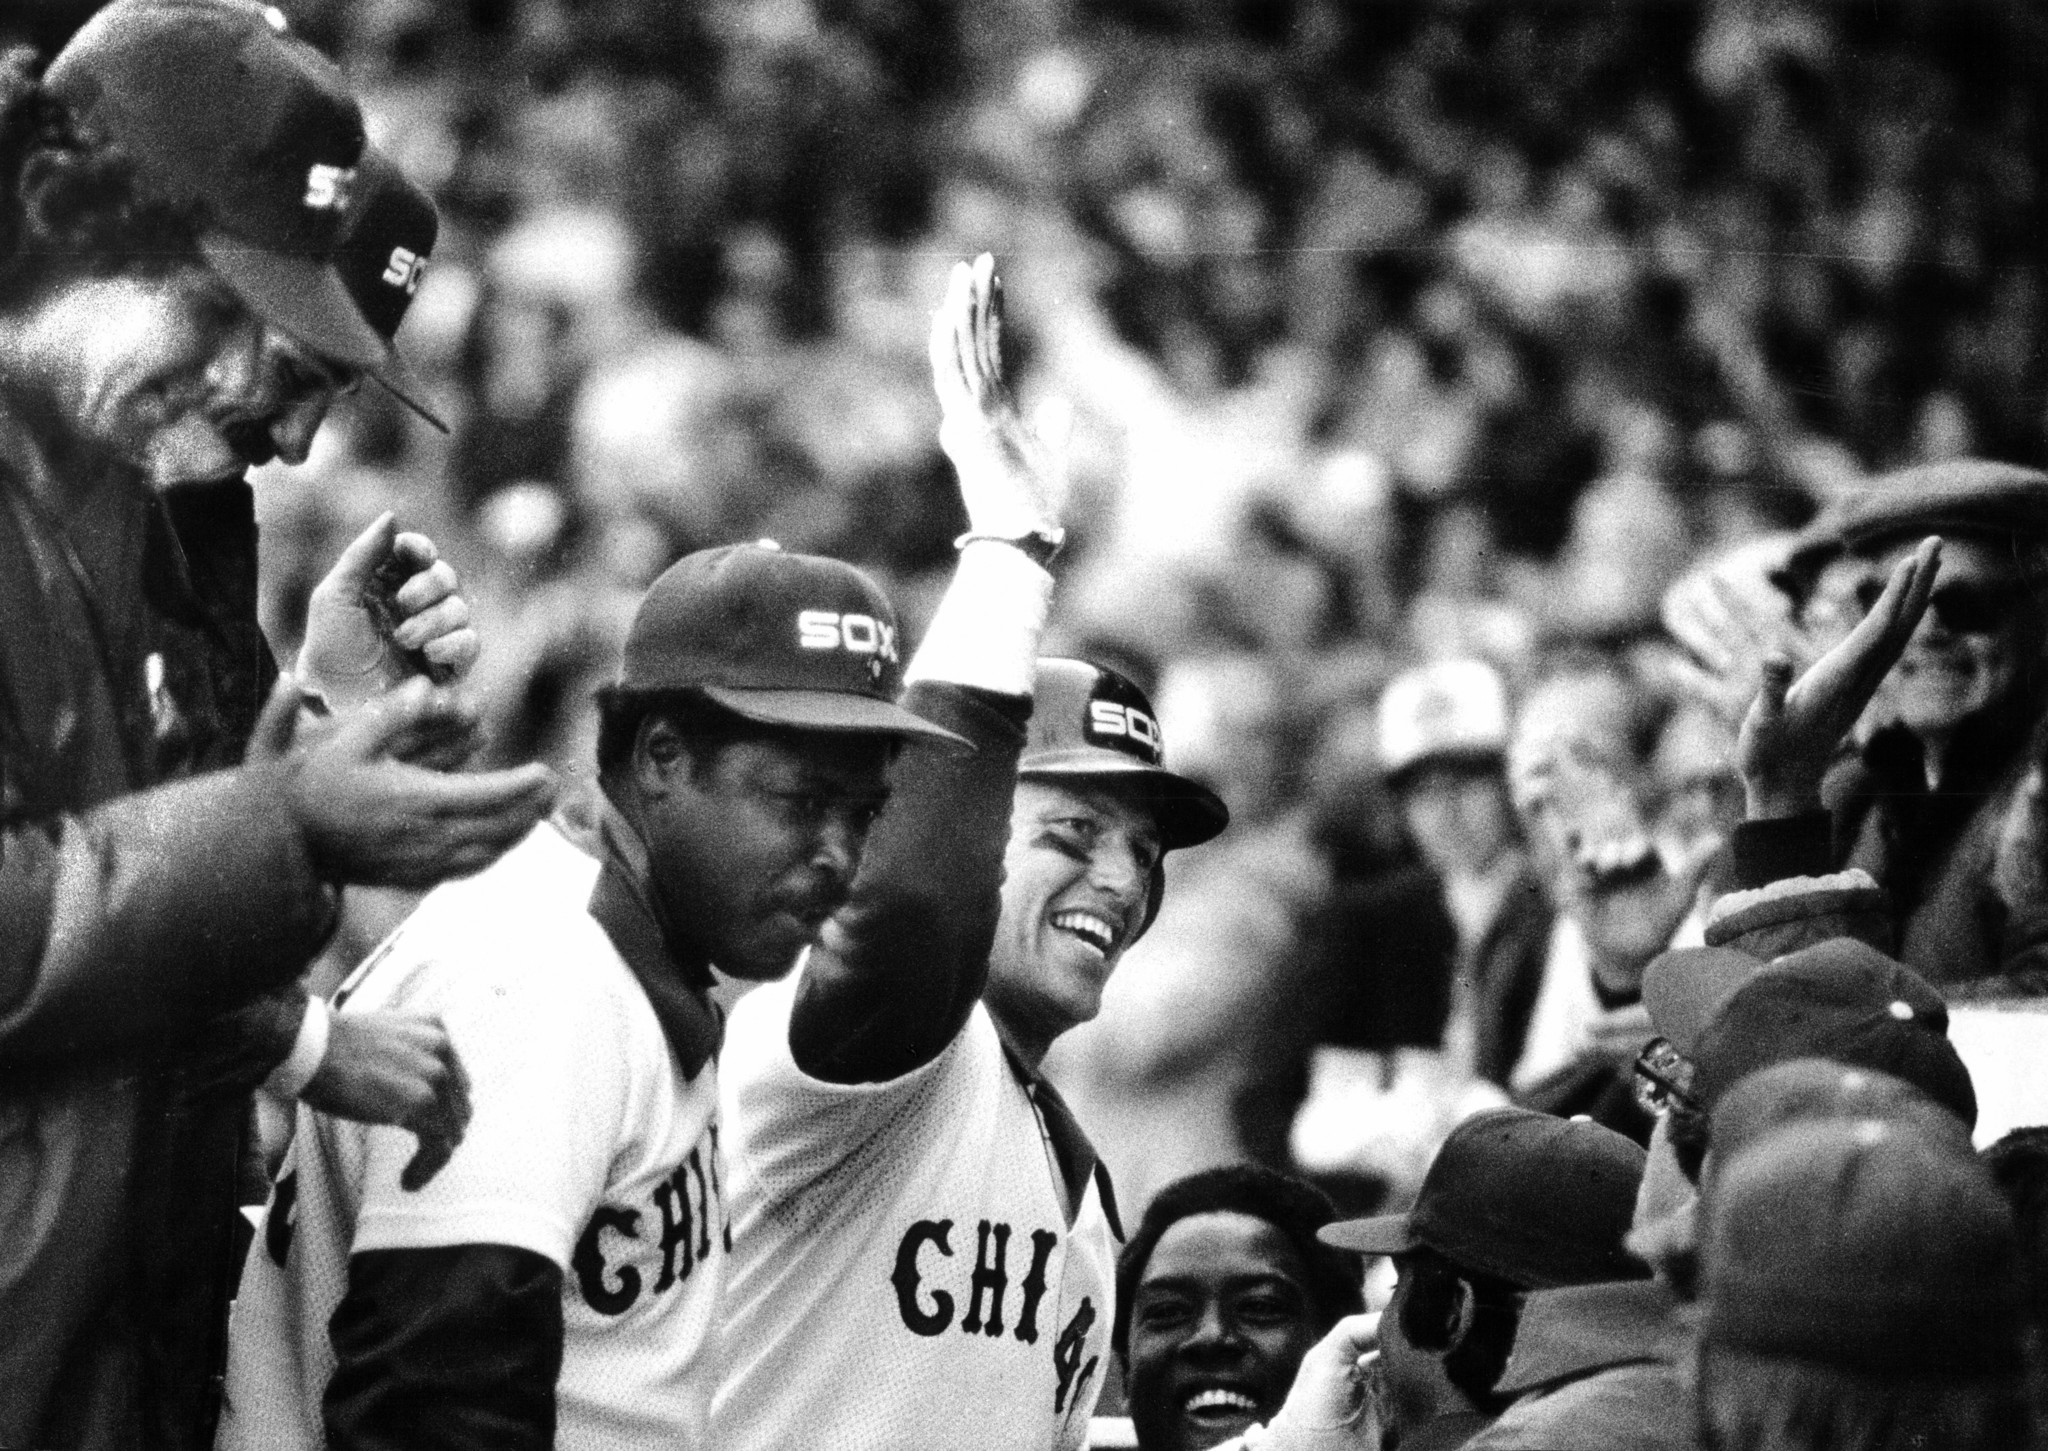 40 years ago today, the White Sox wore shorts for a game